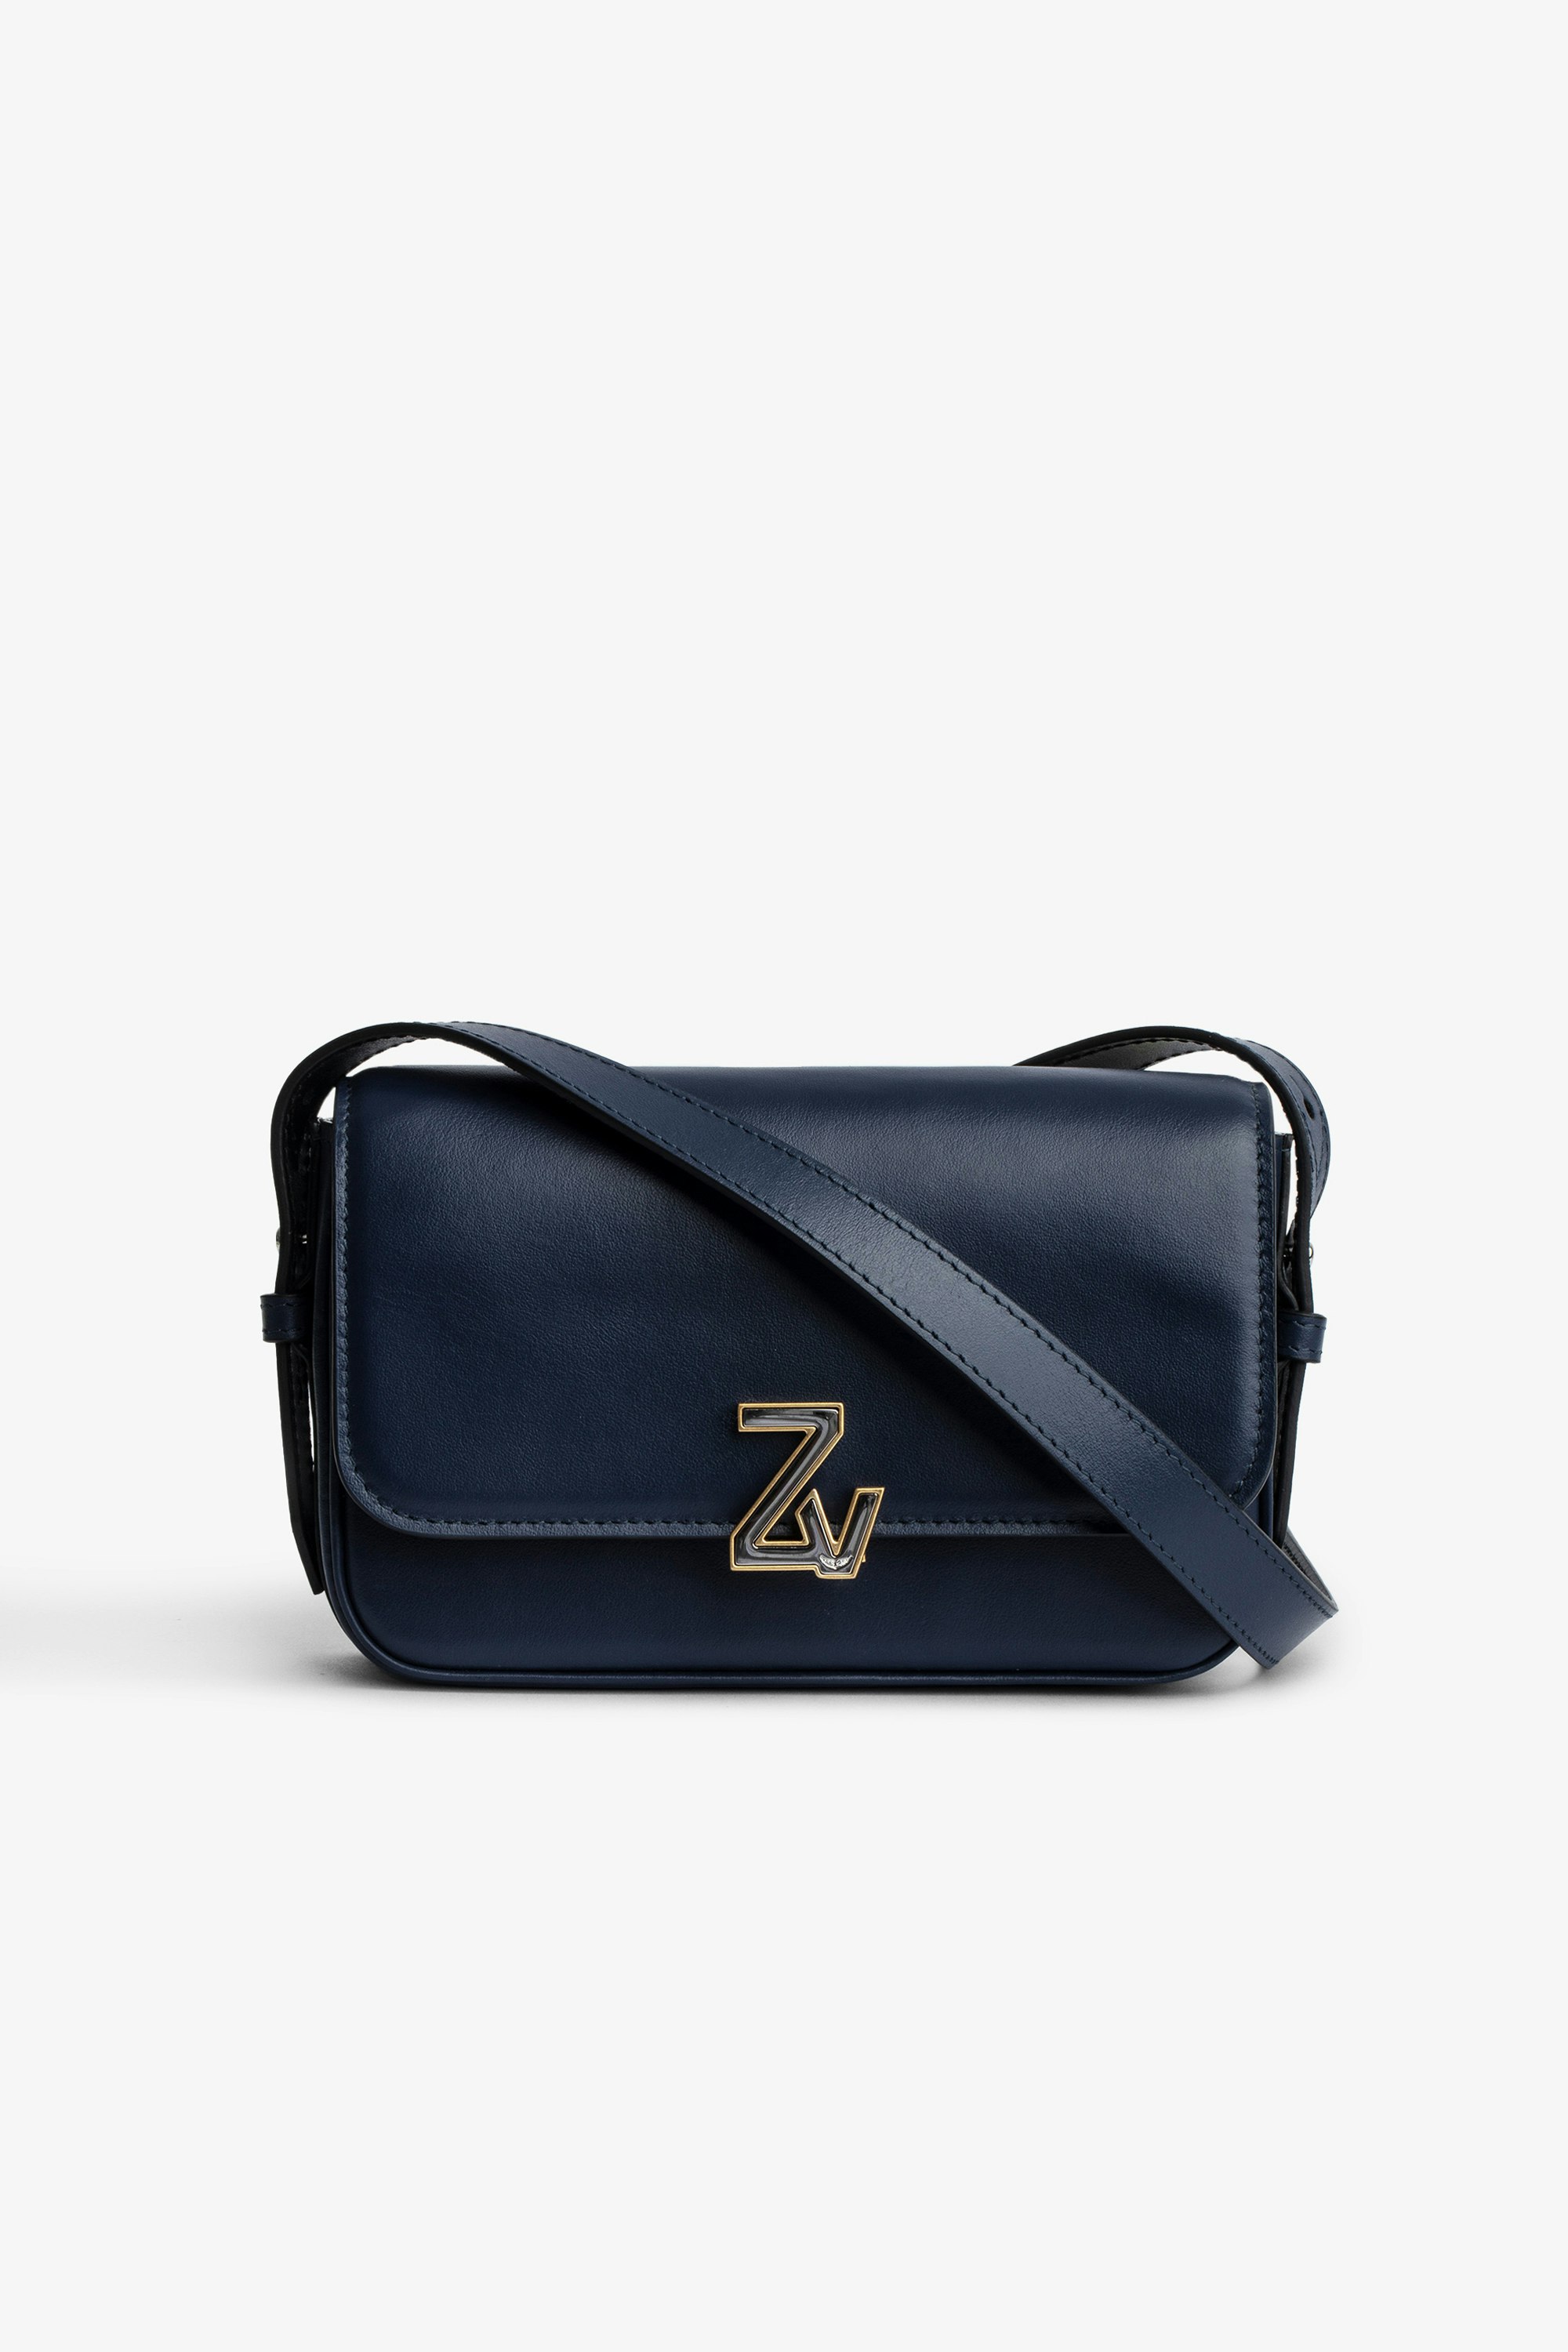 ZV Initiale Le Mini Bag Women’s ZV Initiale Le Mini bag in navy blue smooth leather